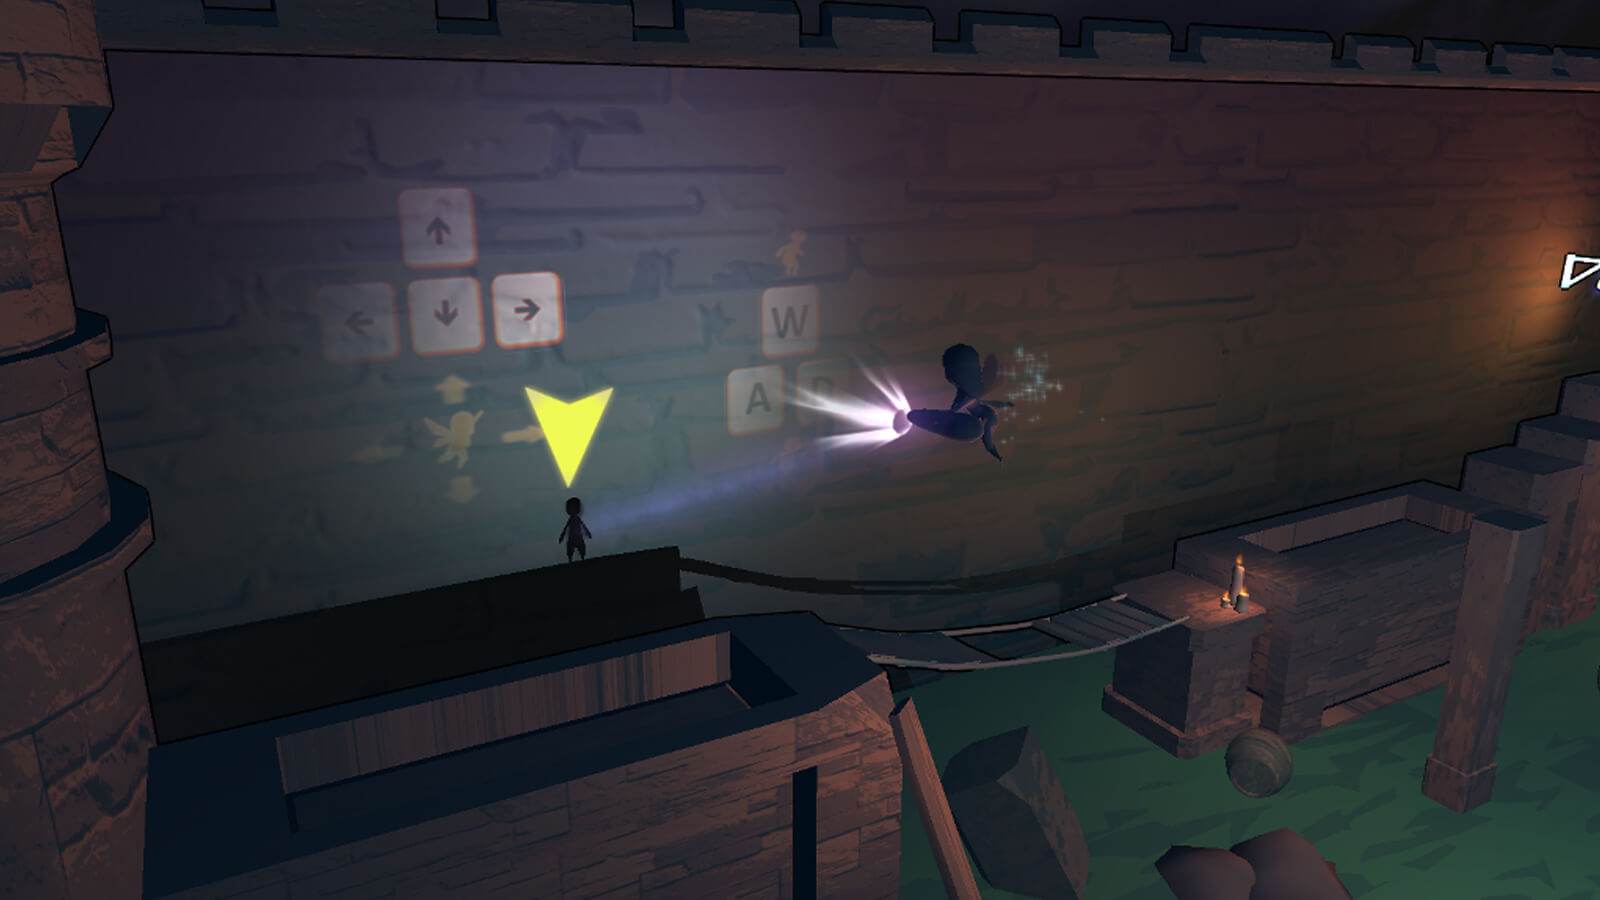 The player's fairy character is in the foreground shining a light illuminating the game's controls on the wall behind